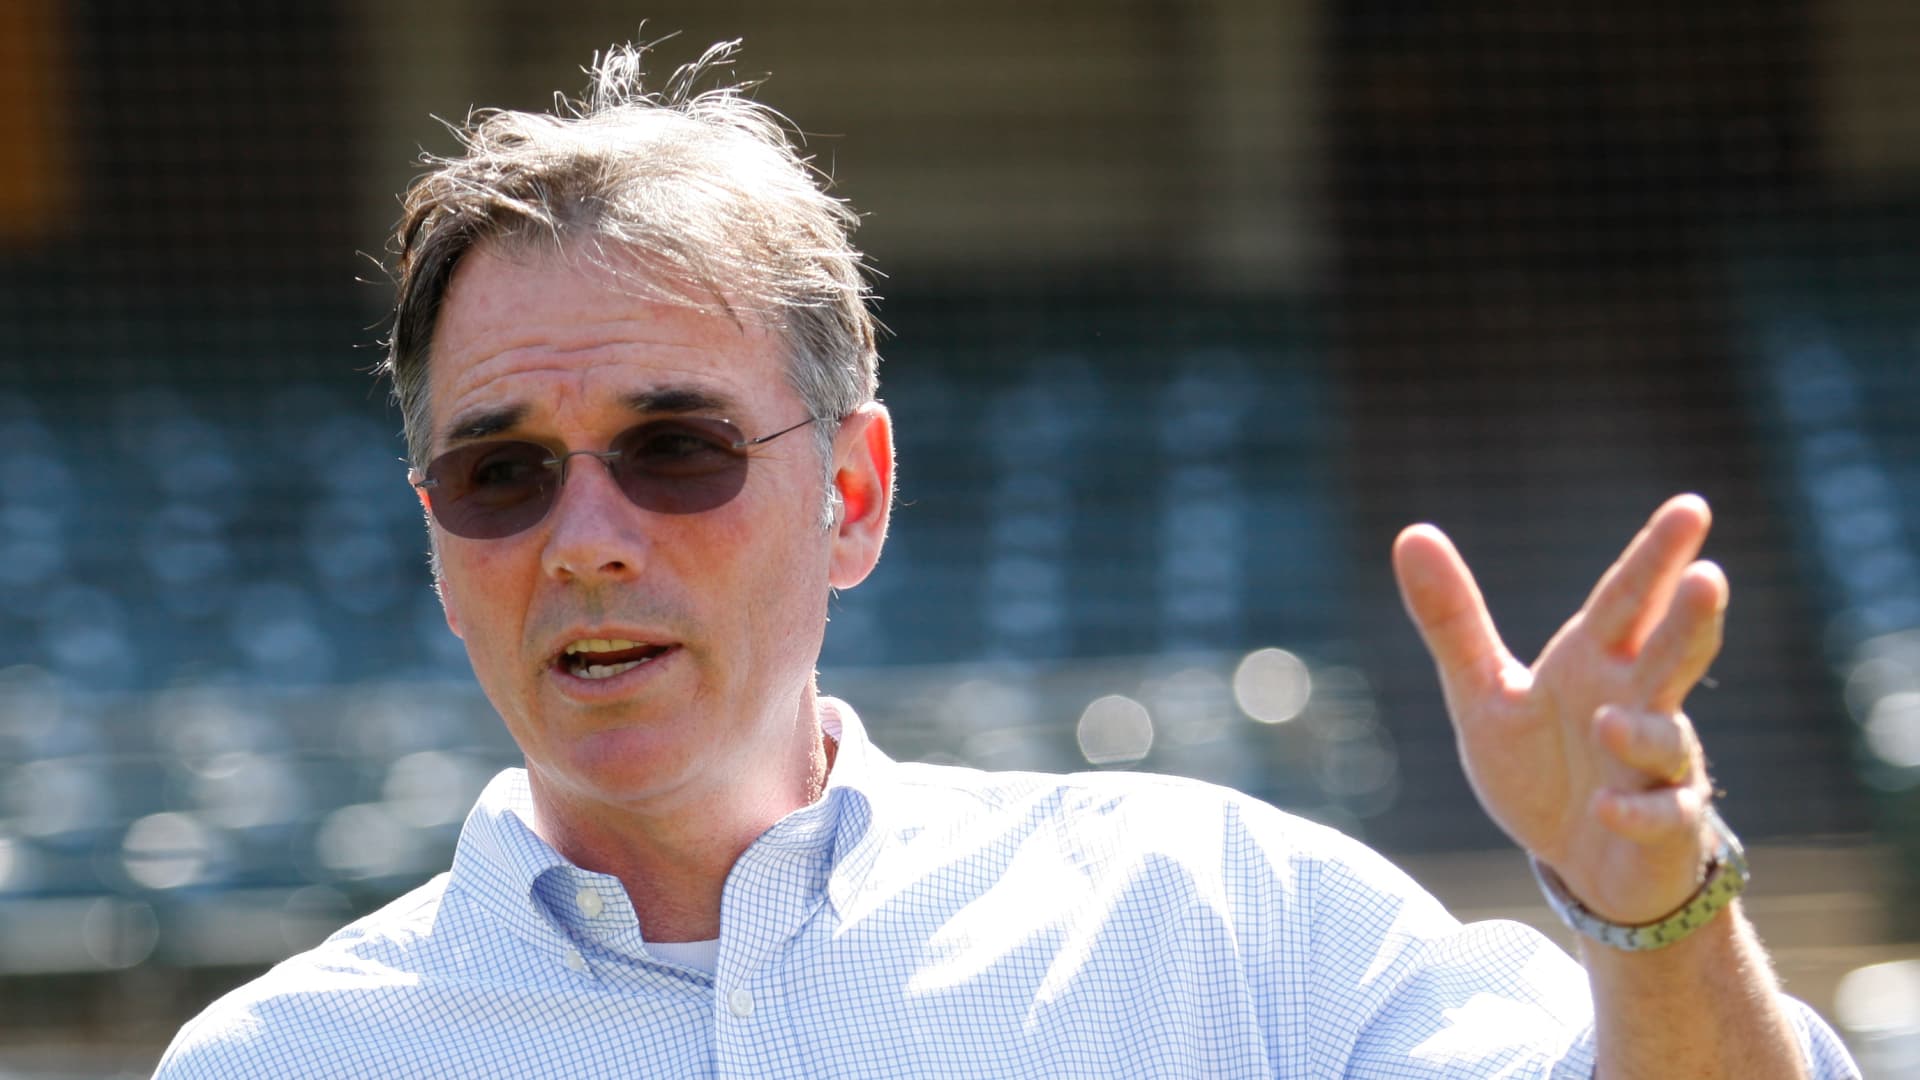 SeatGeek tables deal to go public with Billy Beane’s SPAC due to market volatility